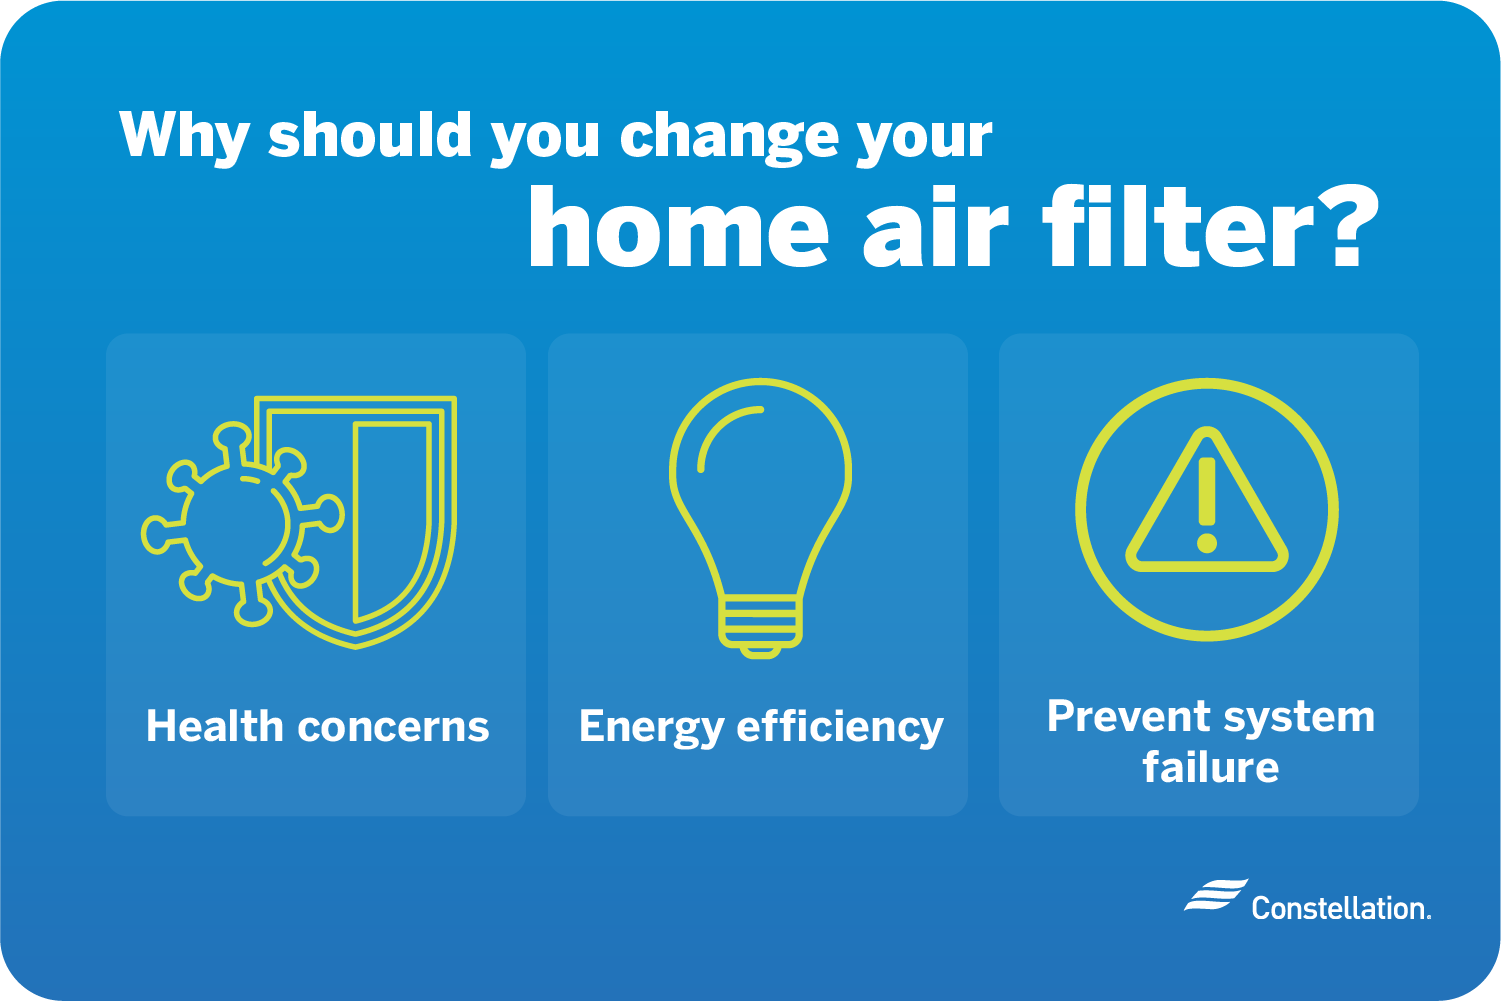 Reasons you should change your home air filter regularly.